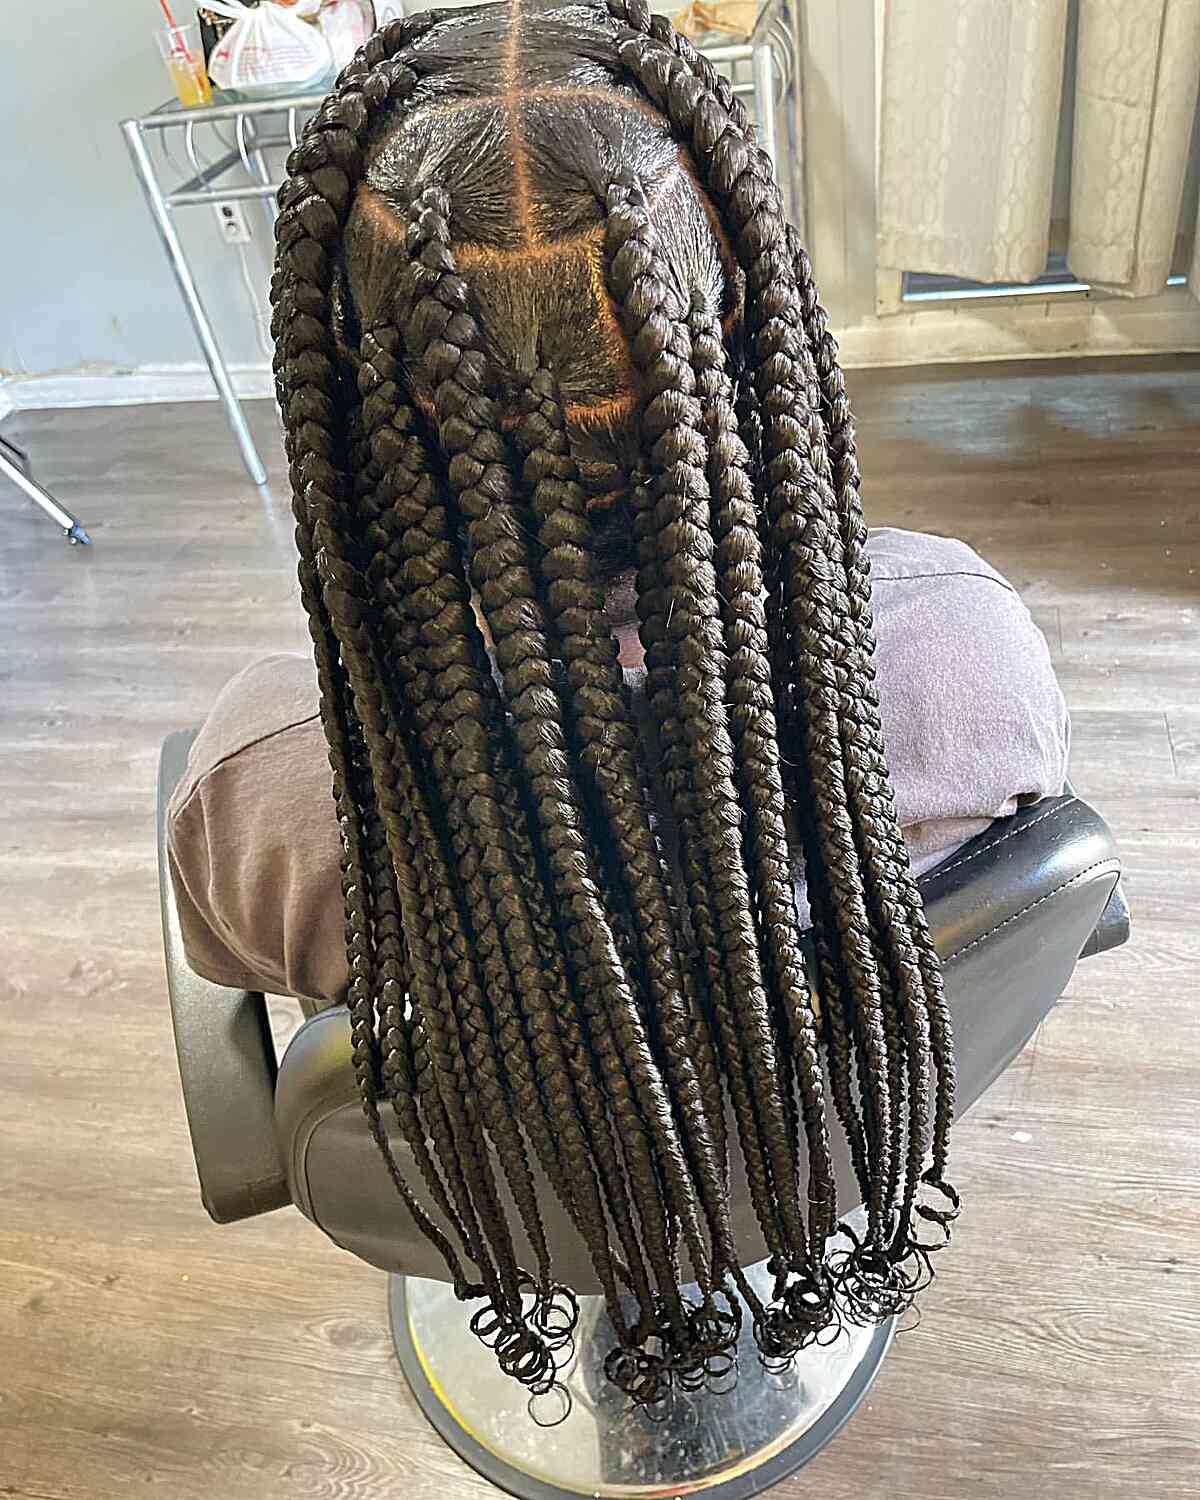 Long Poetic Justice Braids with Curly Ends